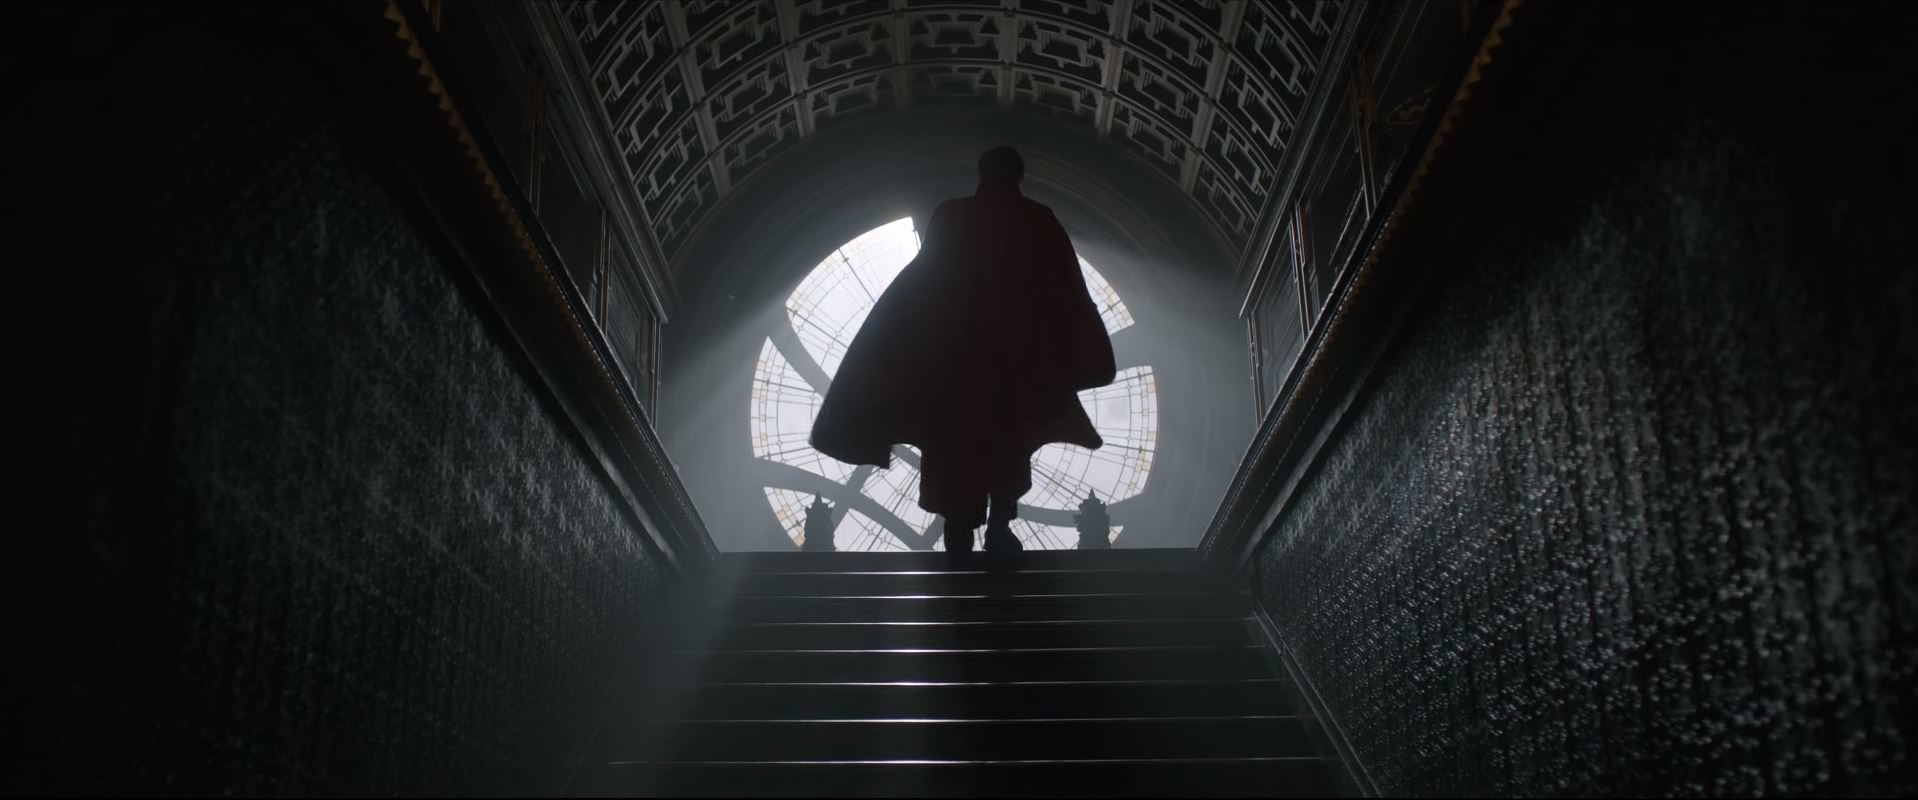 Have You SEEN The Doctor Strange Teaser Trailer Yet? So Much Benedict ...